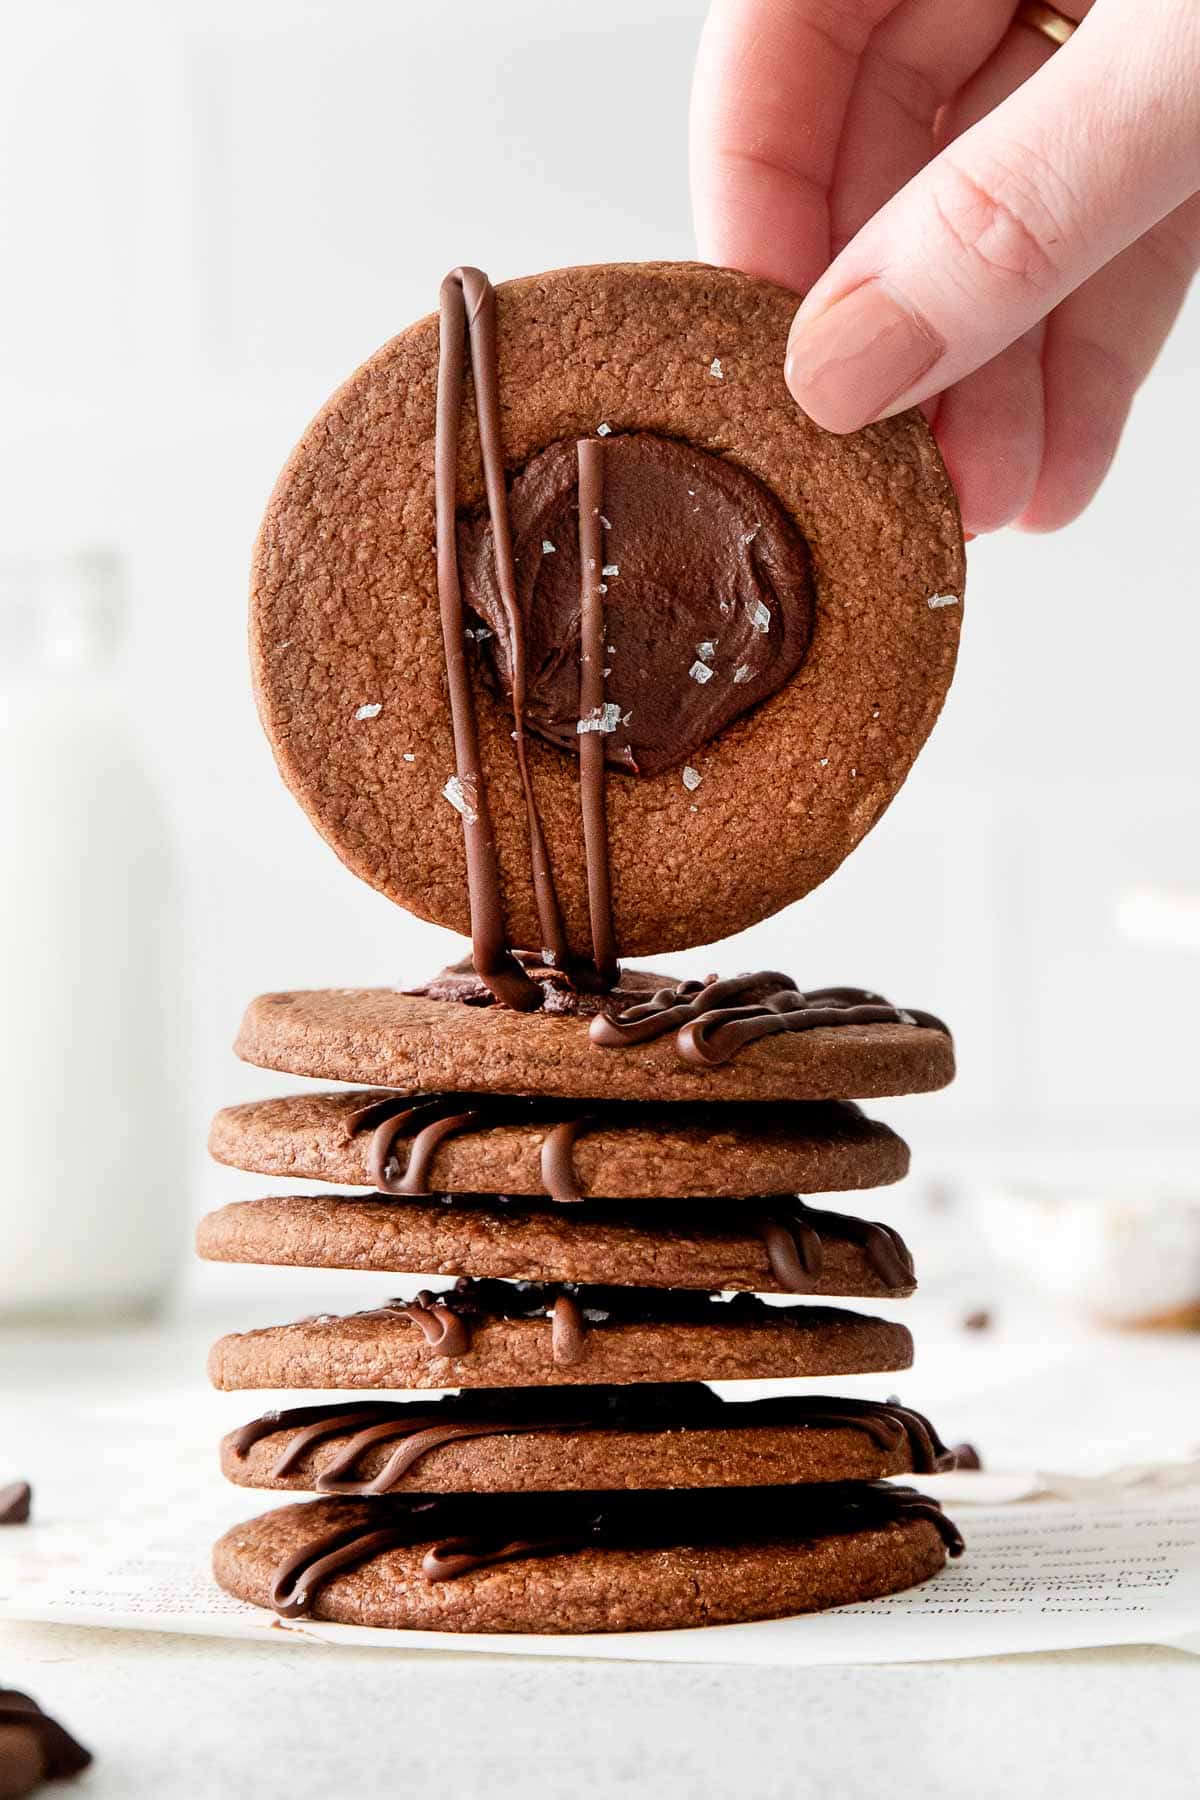 a stack of six chocolate cookies with a woman's hand holding one of them over the top of the stack.